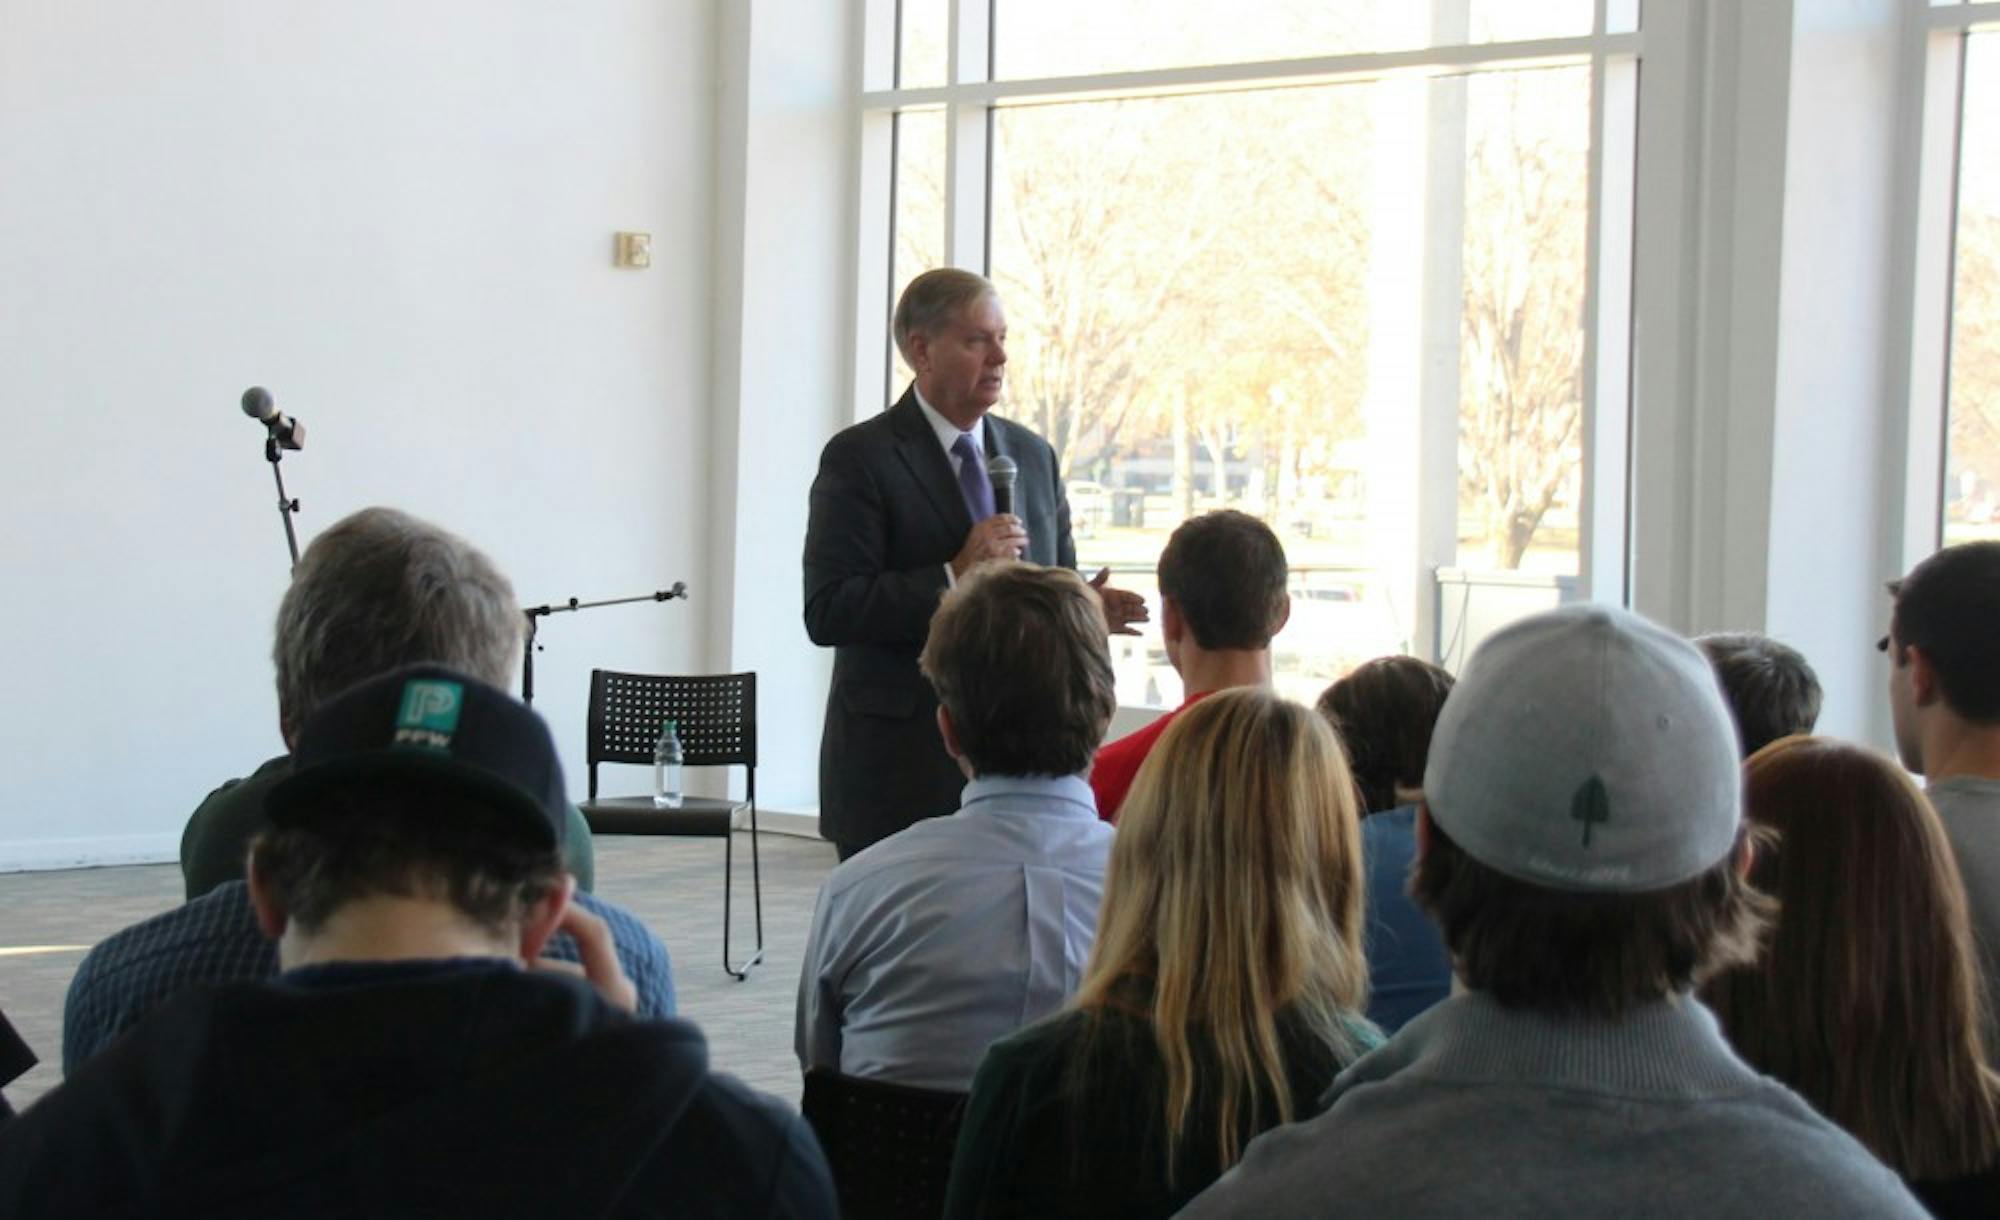 Senator Lindsey Graham spoke about his views on foreign policy, immigration and the economy at the Hopkins Center.